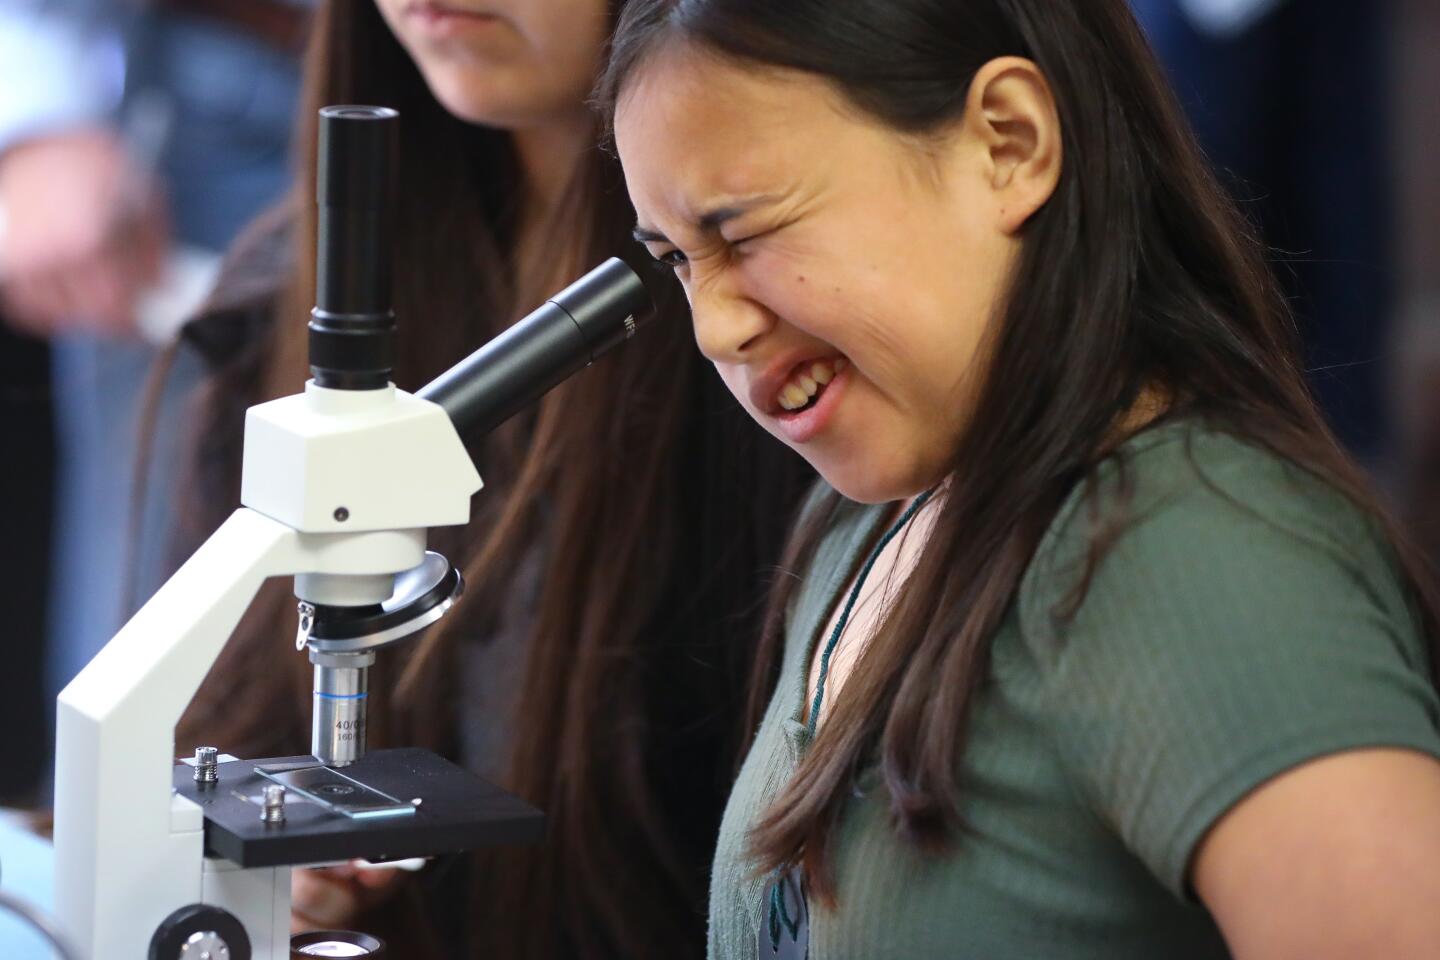 Sophie Gofigan, 13, looks through a microscope, at the Helen Woodward Animal Center, during the one-day veterinarian camp, February 8, in Rancho Santa Fe.